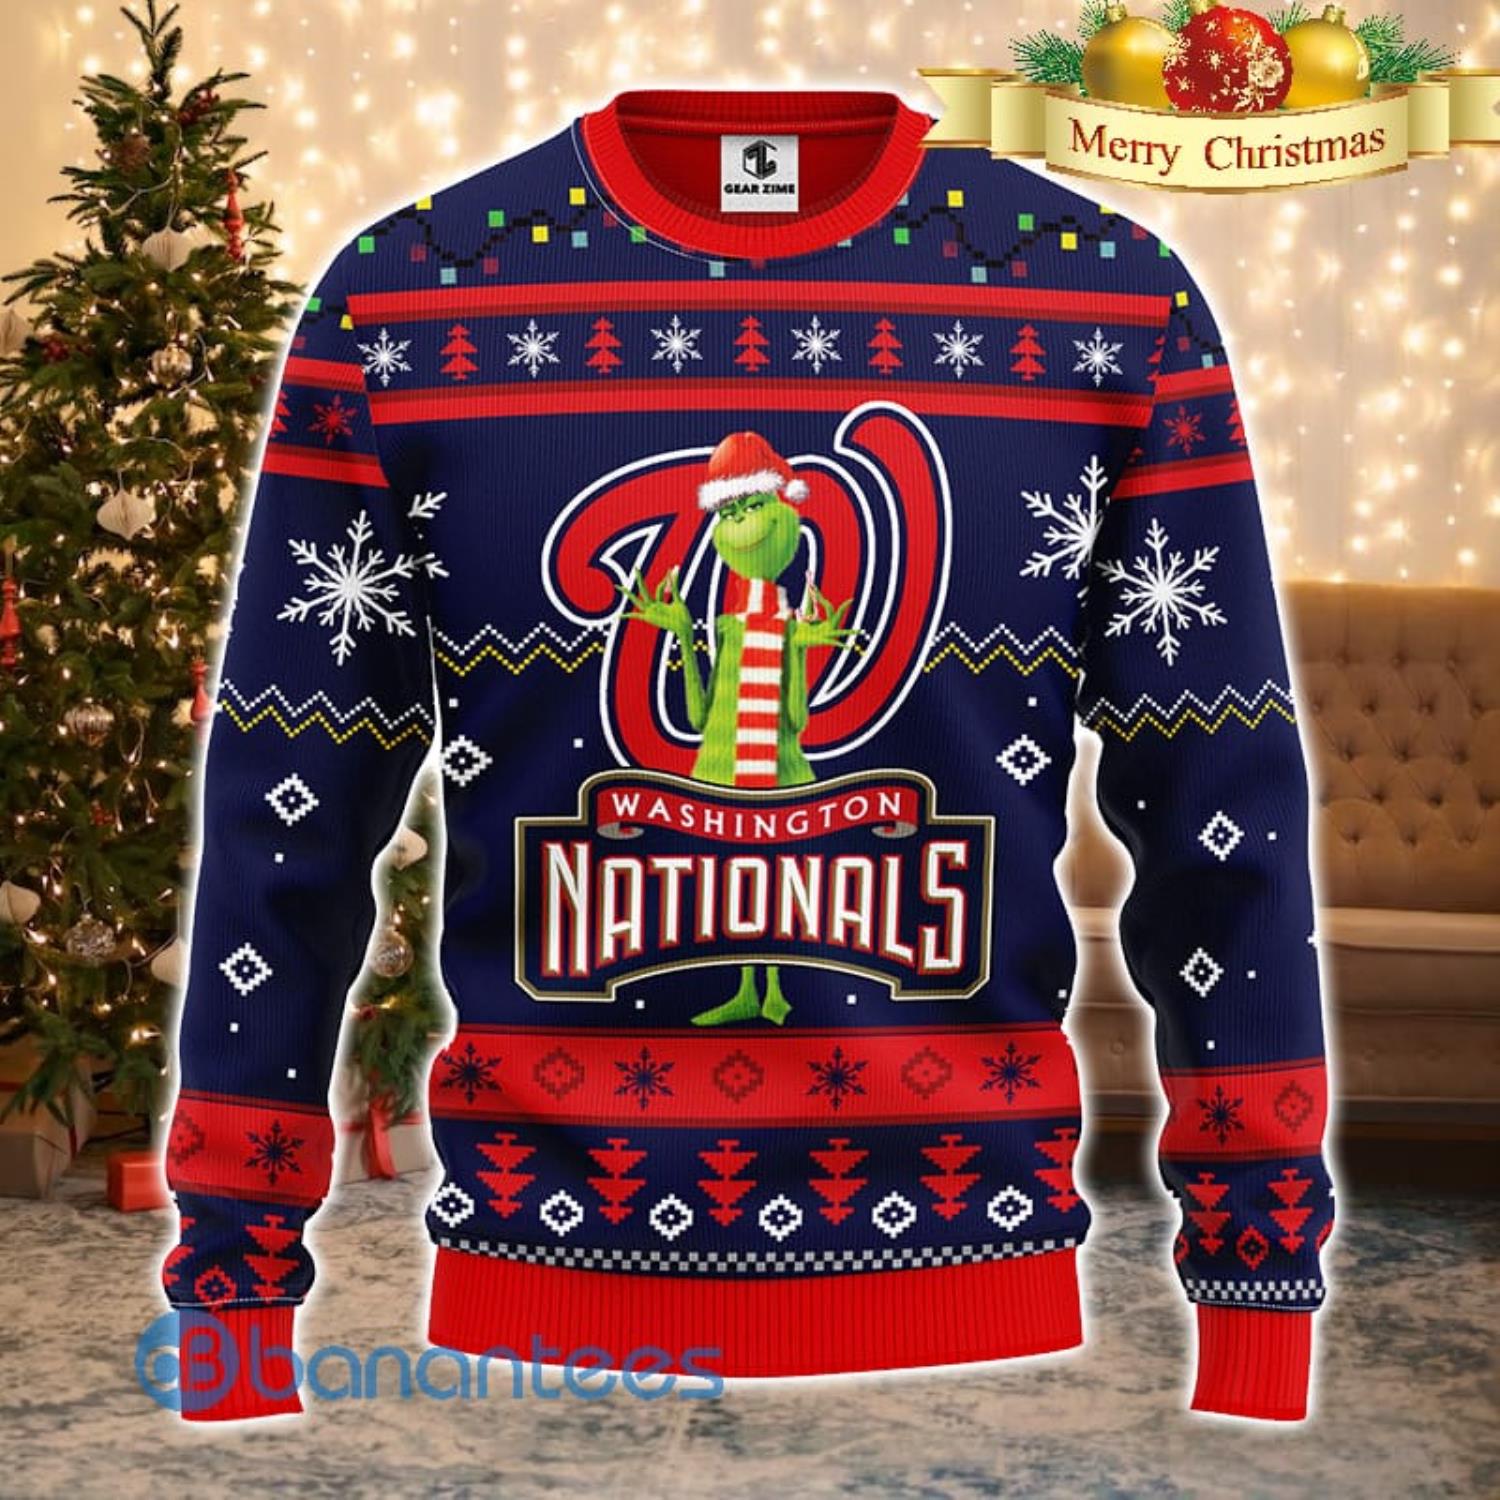 Men And Women Christmas Gift MLB Seattle Mariners Logo With Funny Grinch 3D  Ugly Christmas Sweater For Fans - Banantees